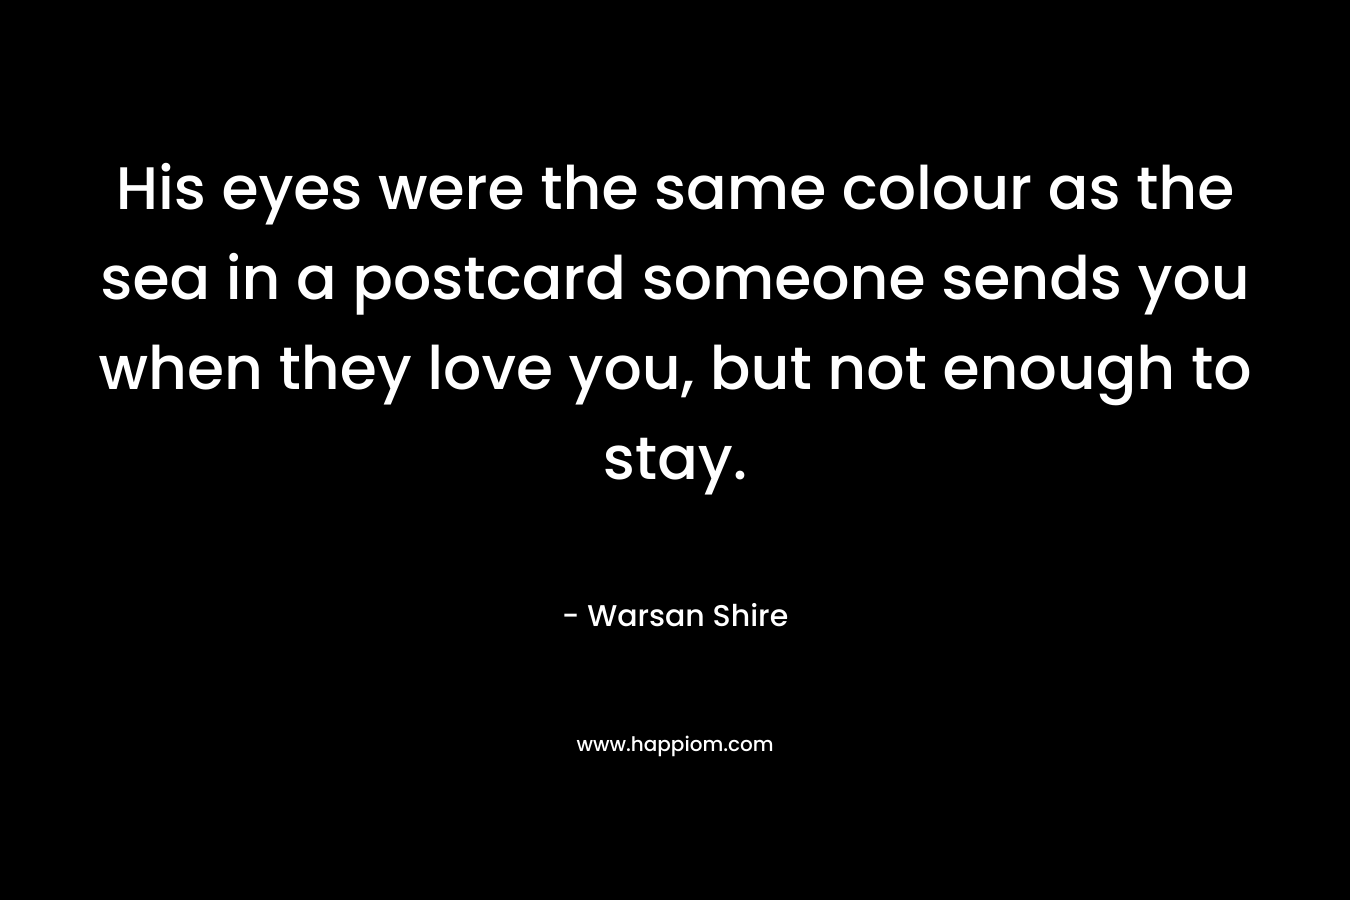 His eyes were the same colour as the sea in a postcard someone sends you when they love you, but not enough to stay. – Warsan Shire